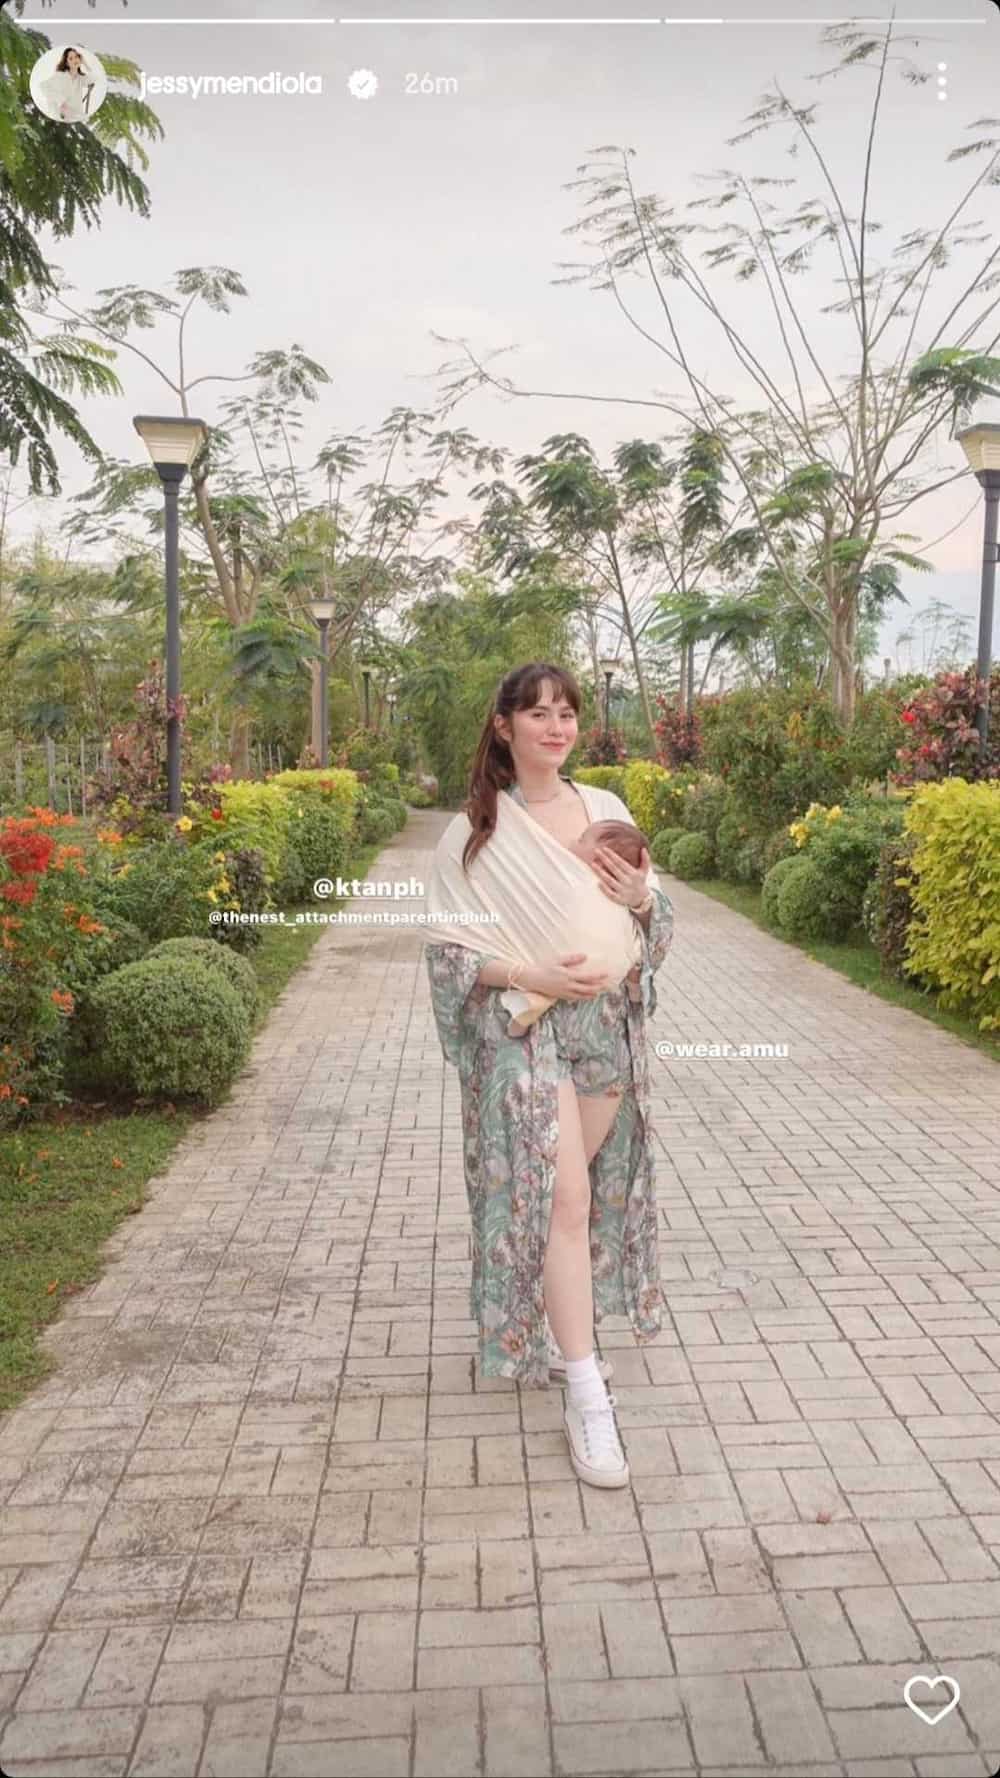 Jessy Mendiola posts new family photos with Luis Manzano and baby Isabella Rose